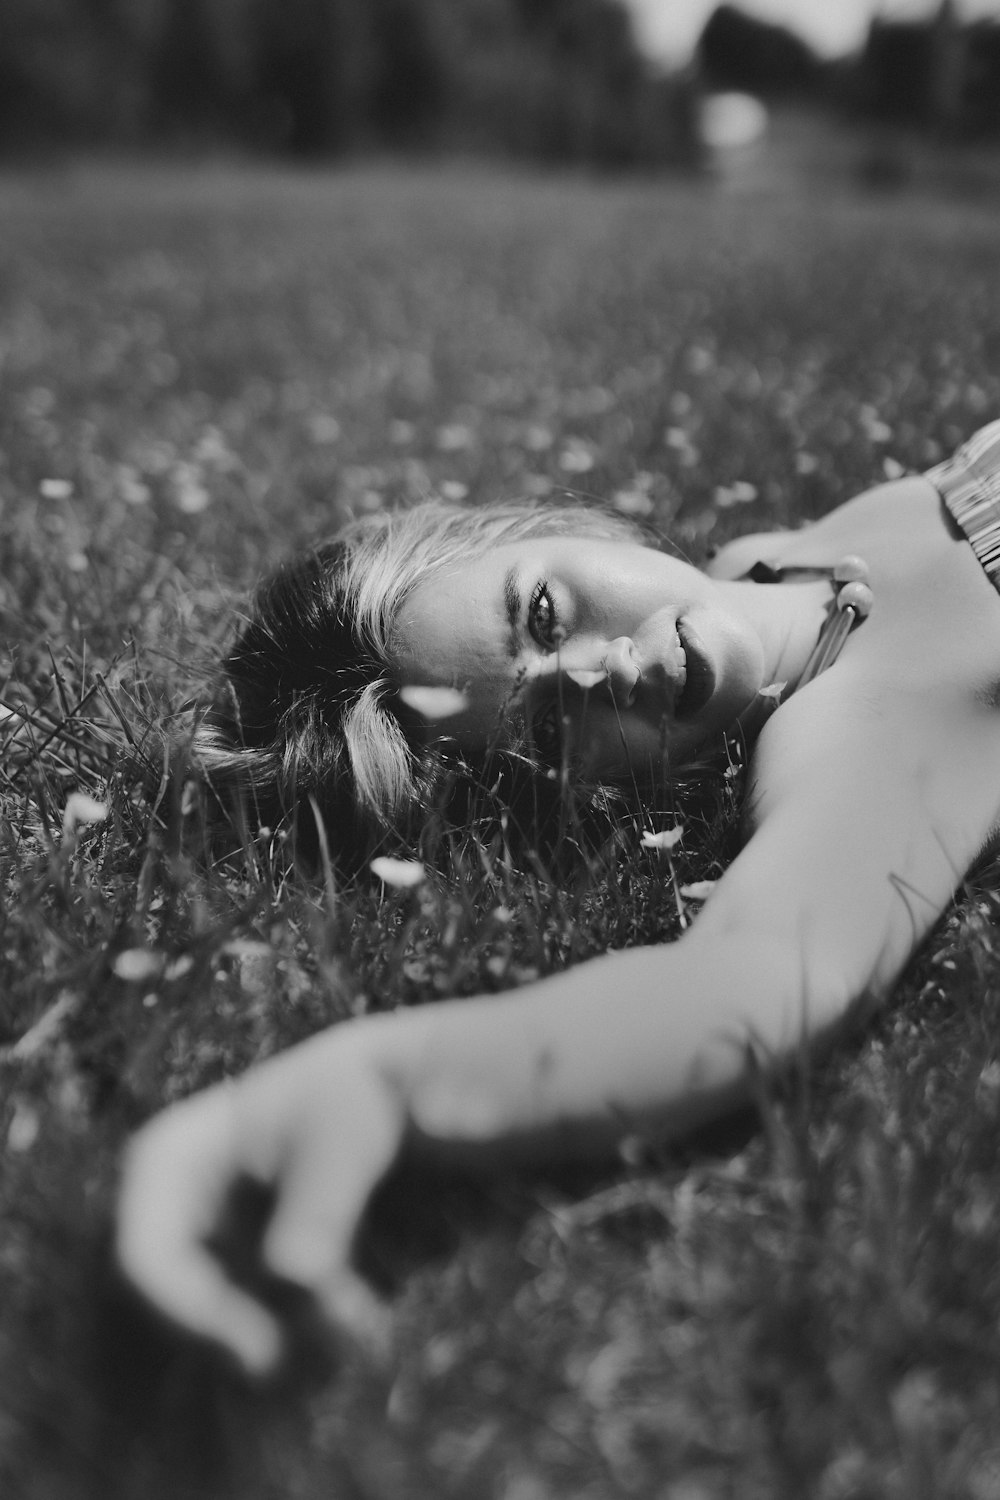 grayscale photo of woman lying on grass